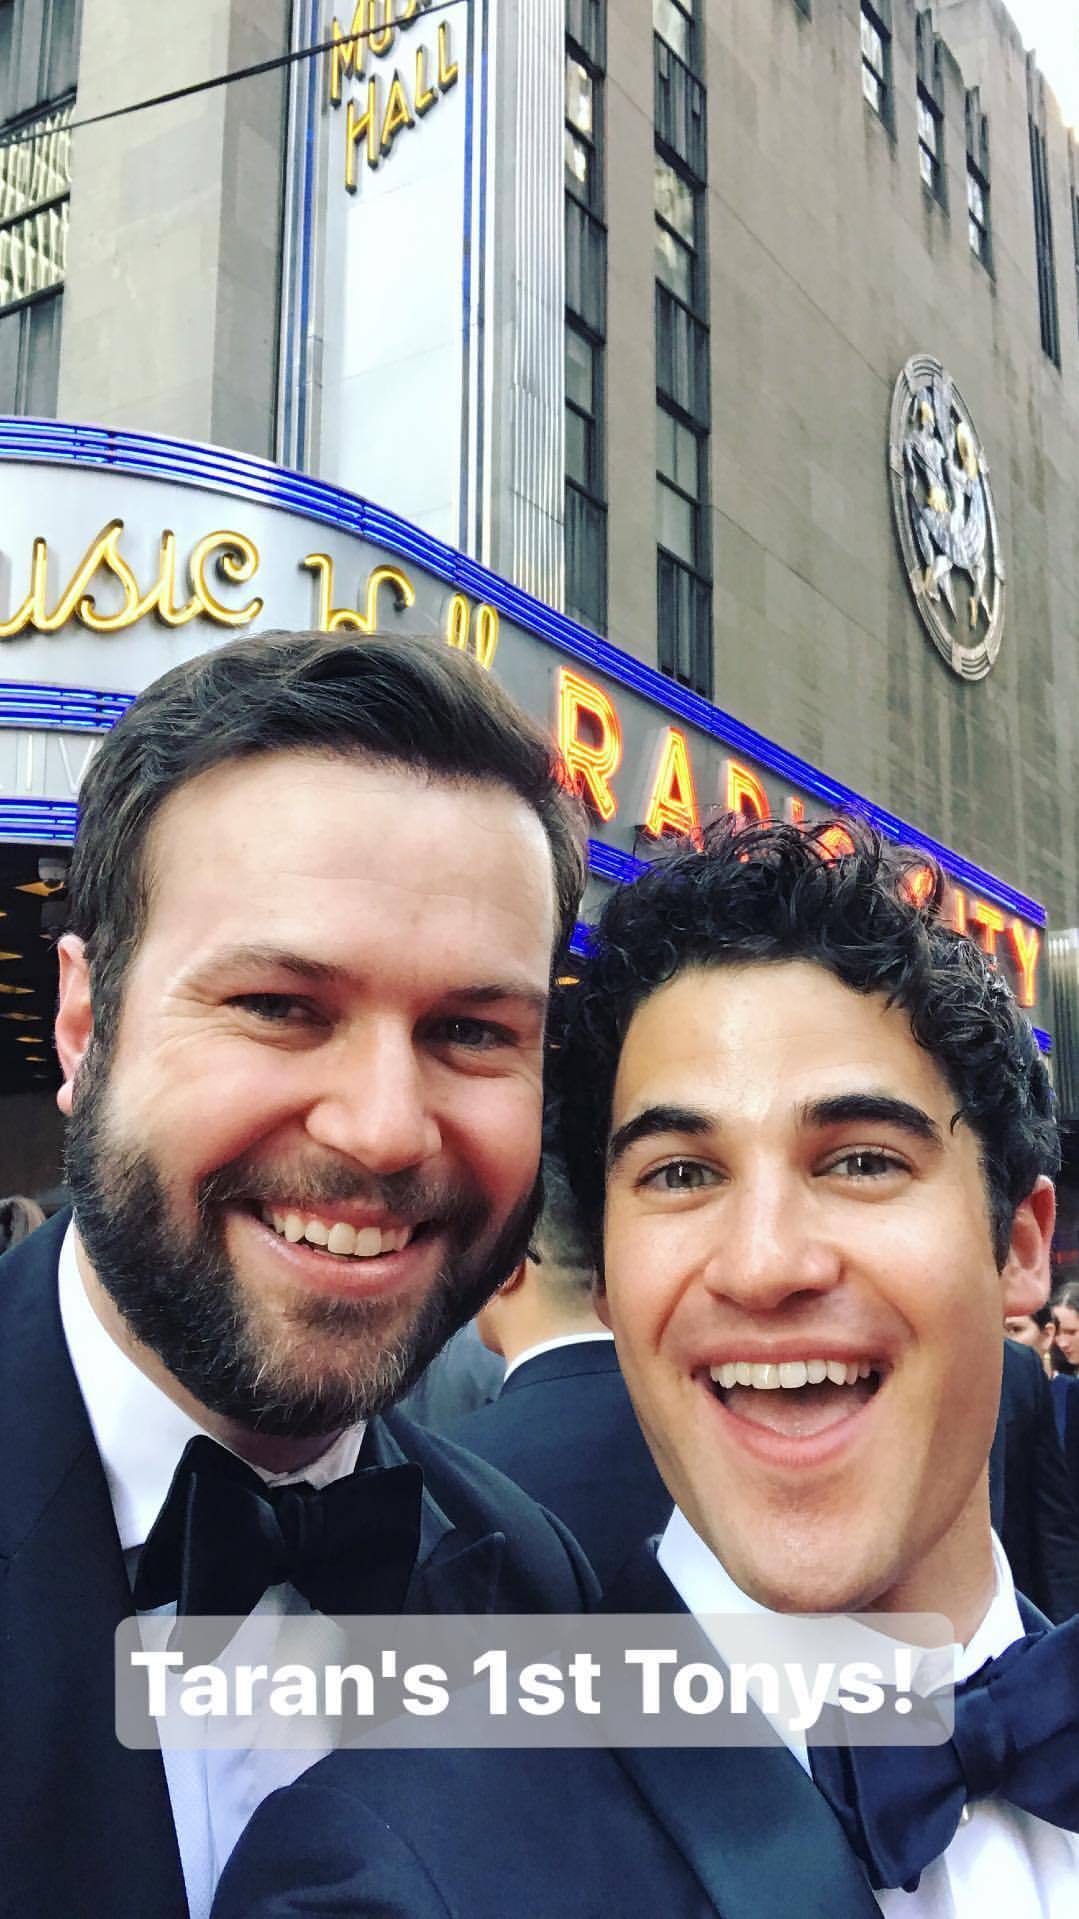 tonyawards2017 - Darren's Miscellaneous Projects and Events for 2017 - Page 2 Tumblr_orexo7OdU11wpi2k2o3_1280